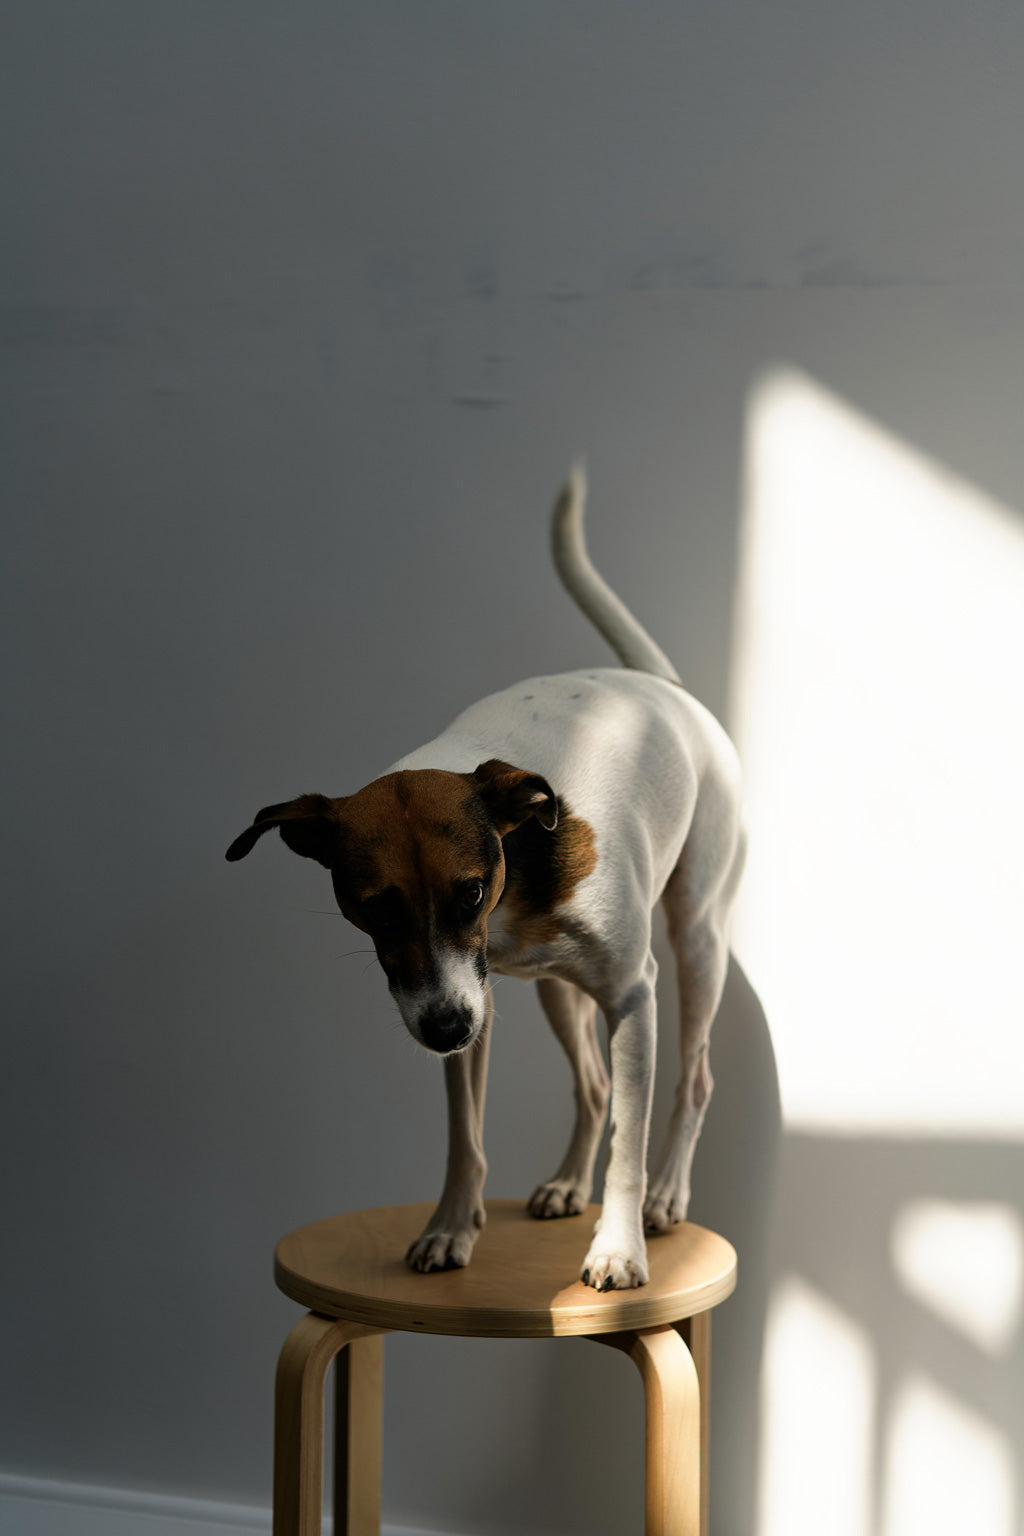 Parsons Terrier | Parsons Jack Russell | Dog